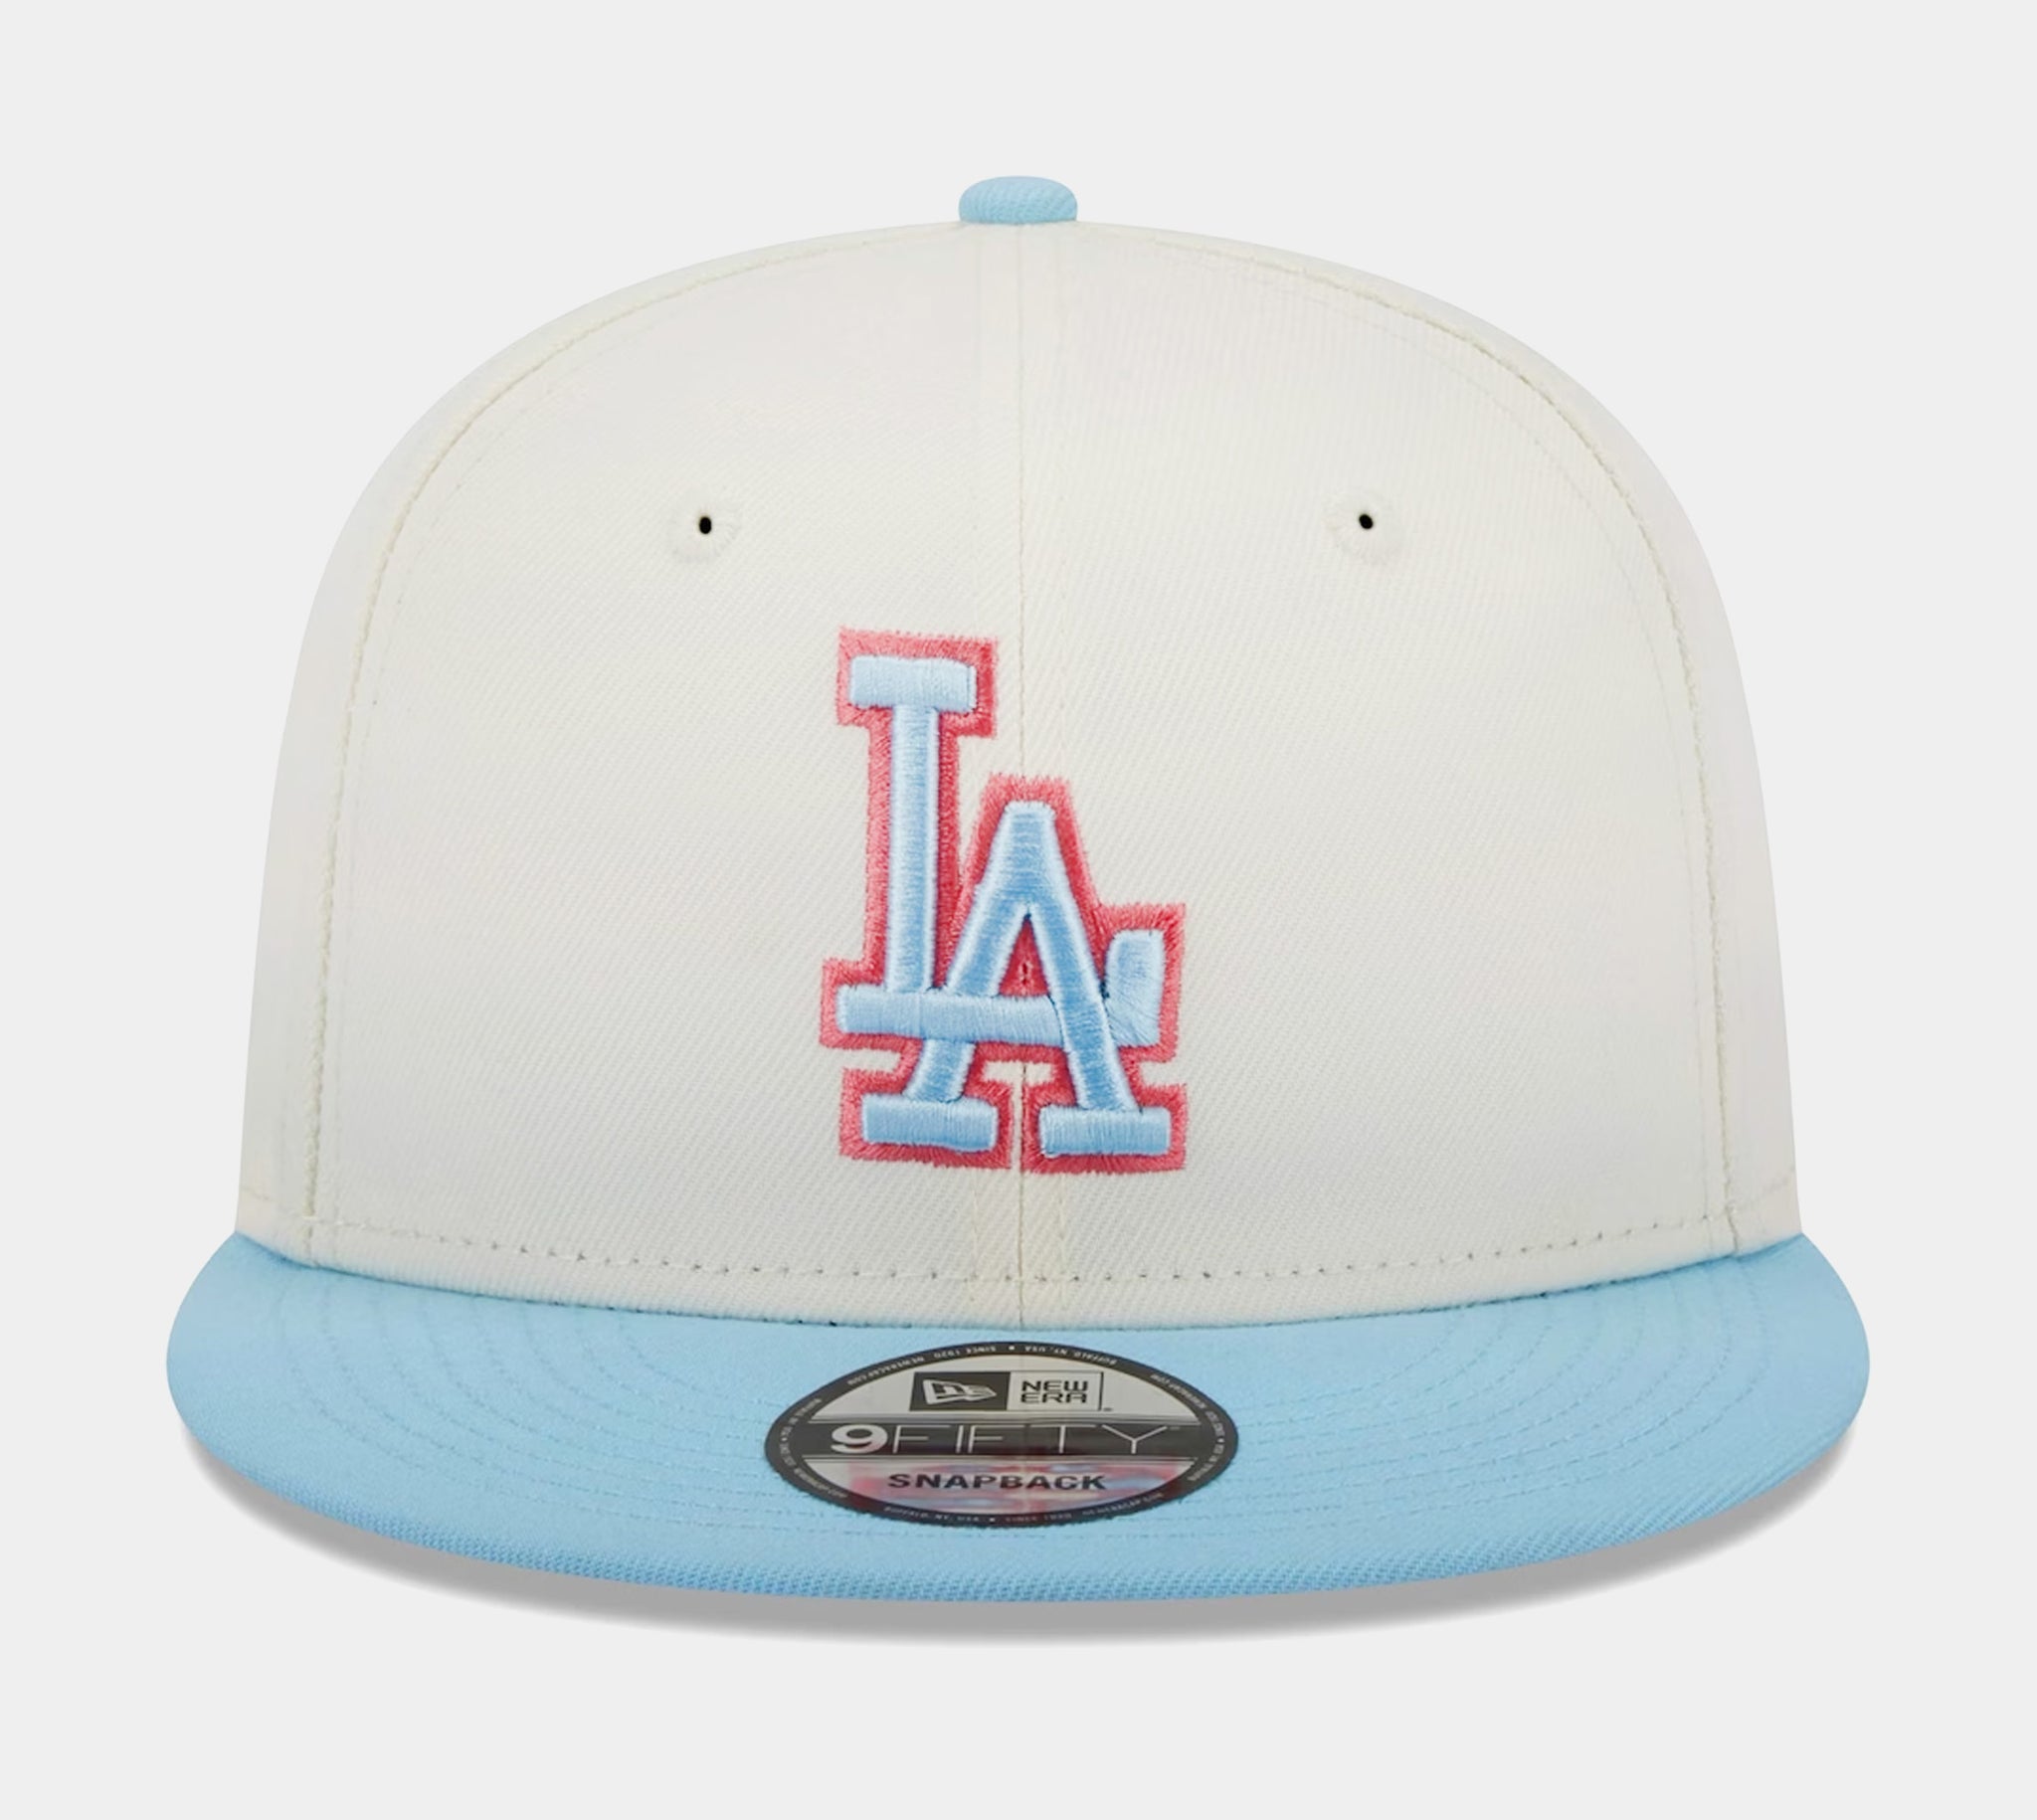 New Era Los Angeles Dodgers Colorpack 59FIFTY Mens Fitted Hat (Blue/White)